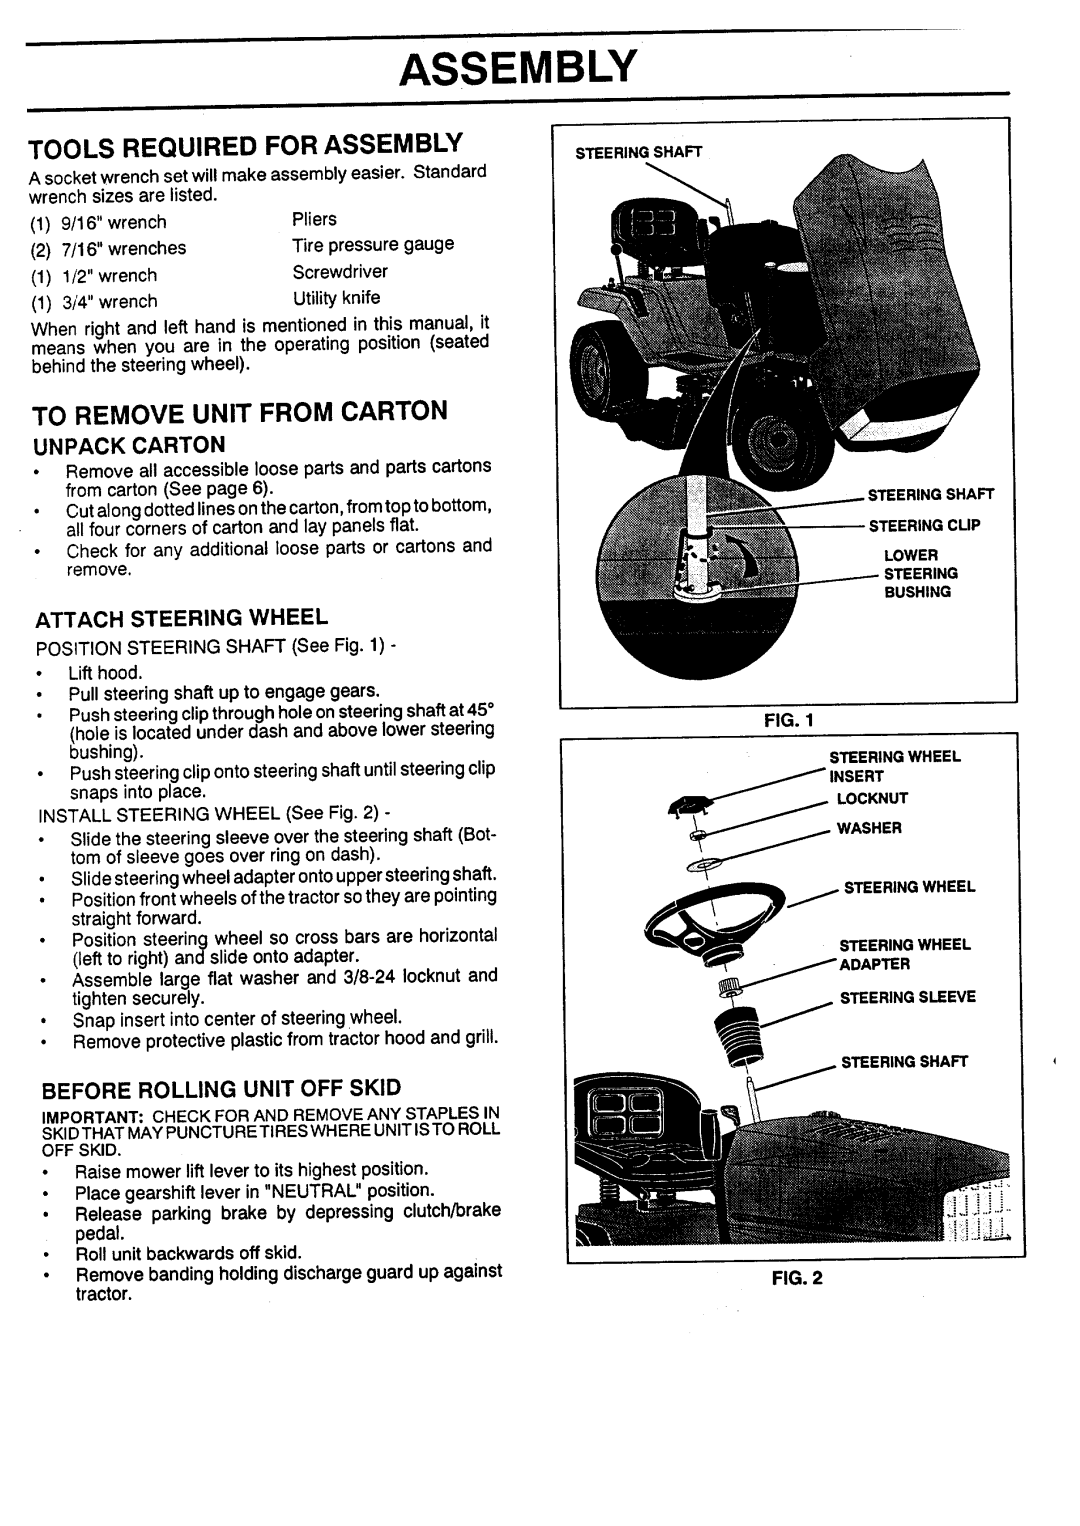 Sears 917.257462 Tools Required For Assembly, To Remove Unit From Carton, Before Rolling Unit Off Skid, Unpack Carton 